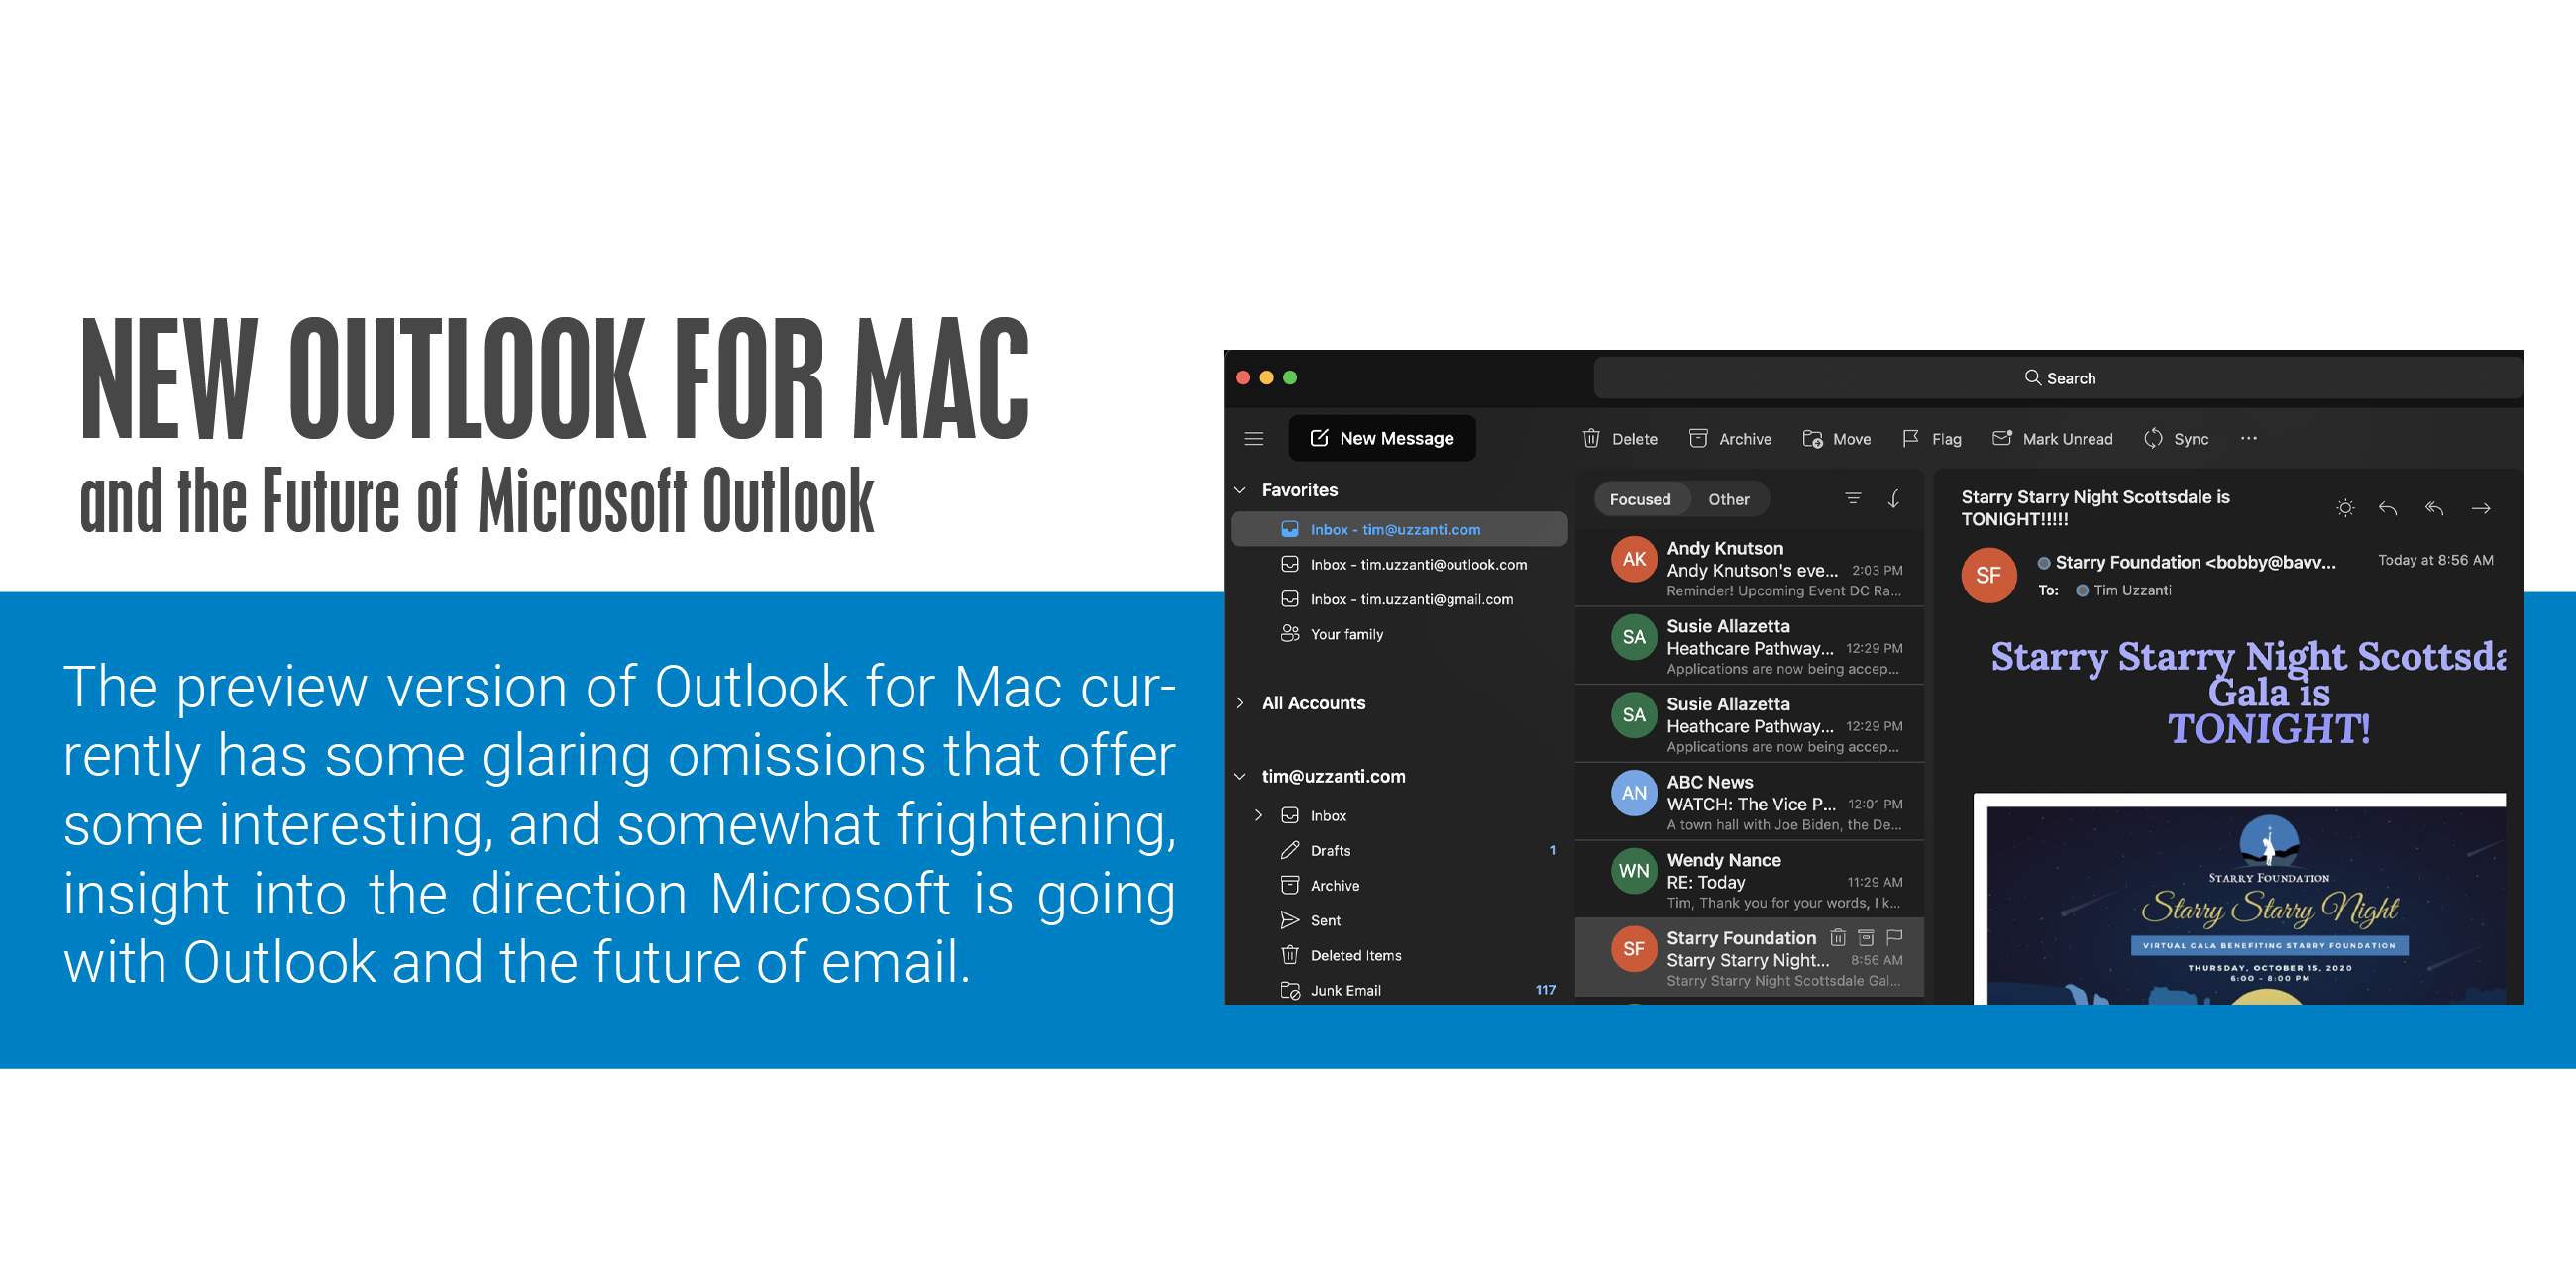 New Outlook for Mac